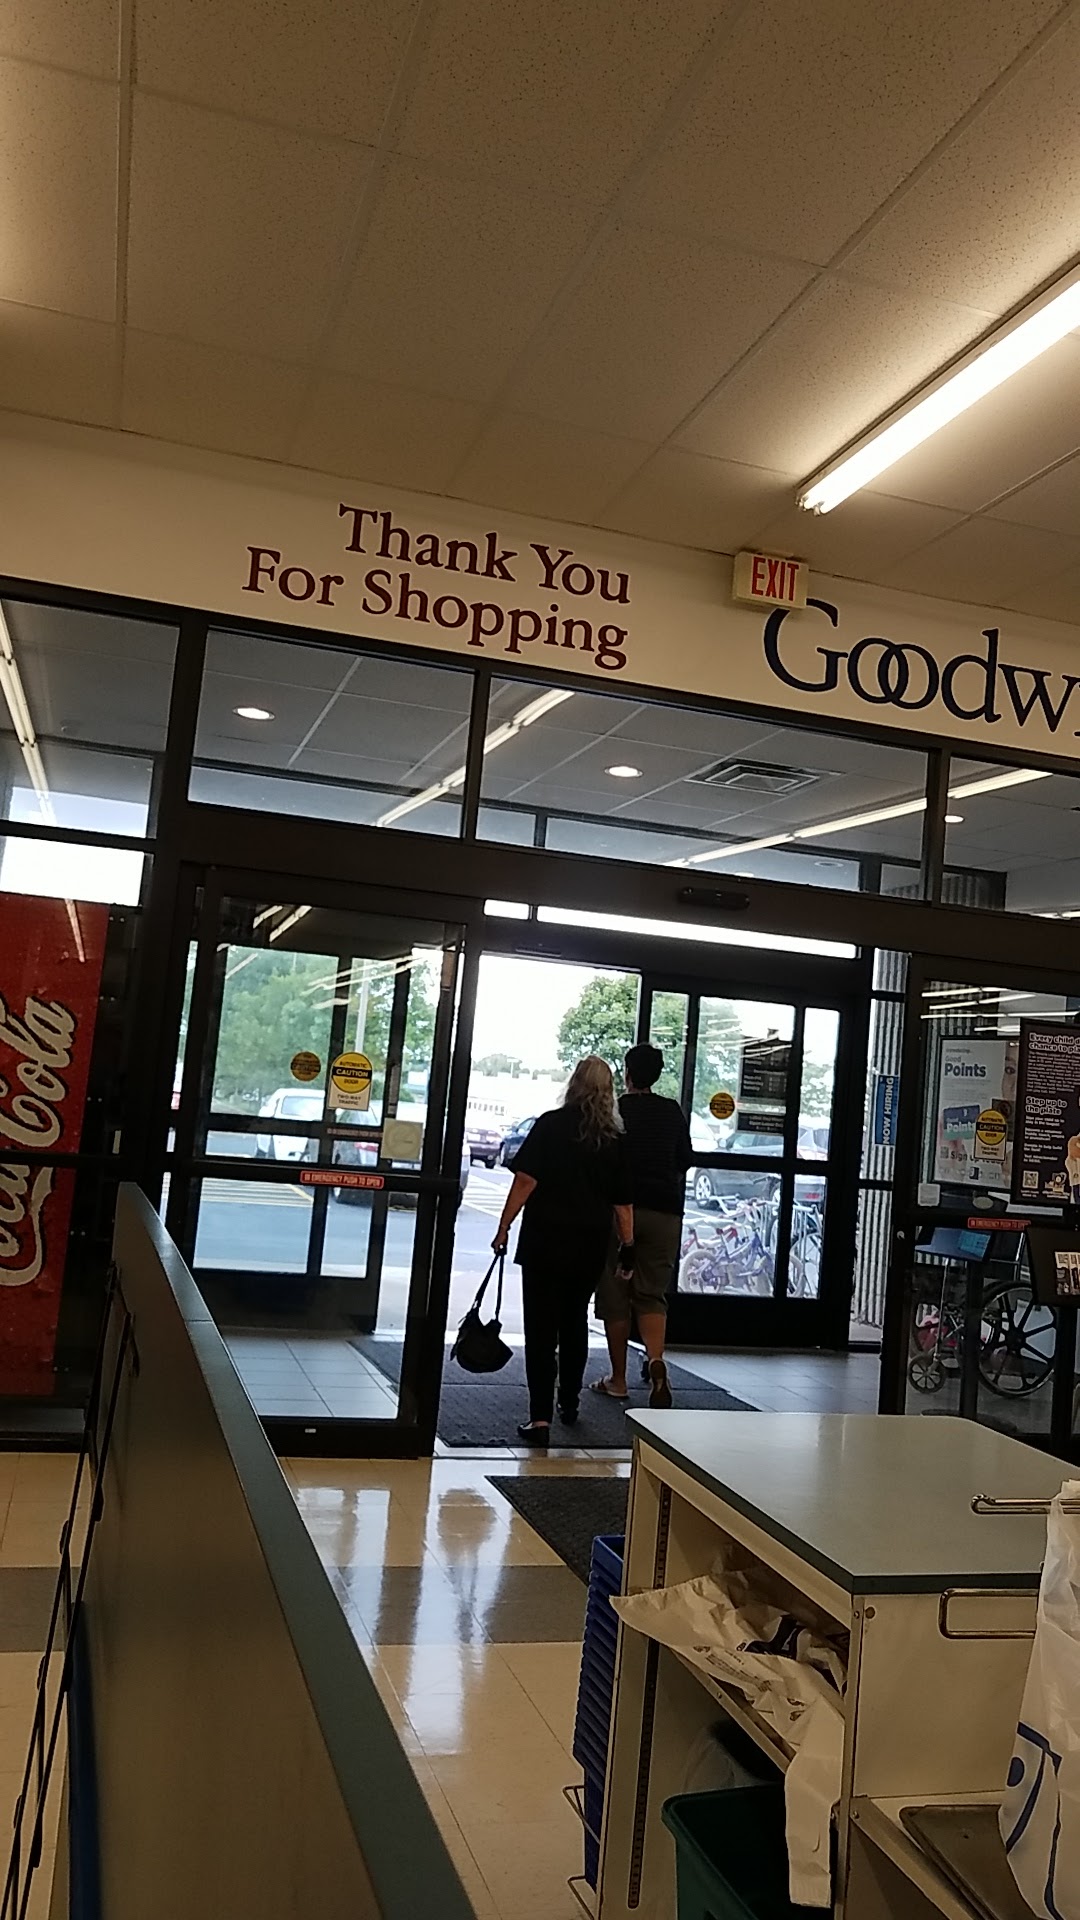 Eau Claire Goodwill Retail Store and Training Center